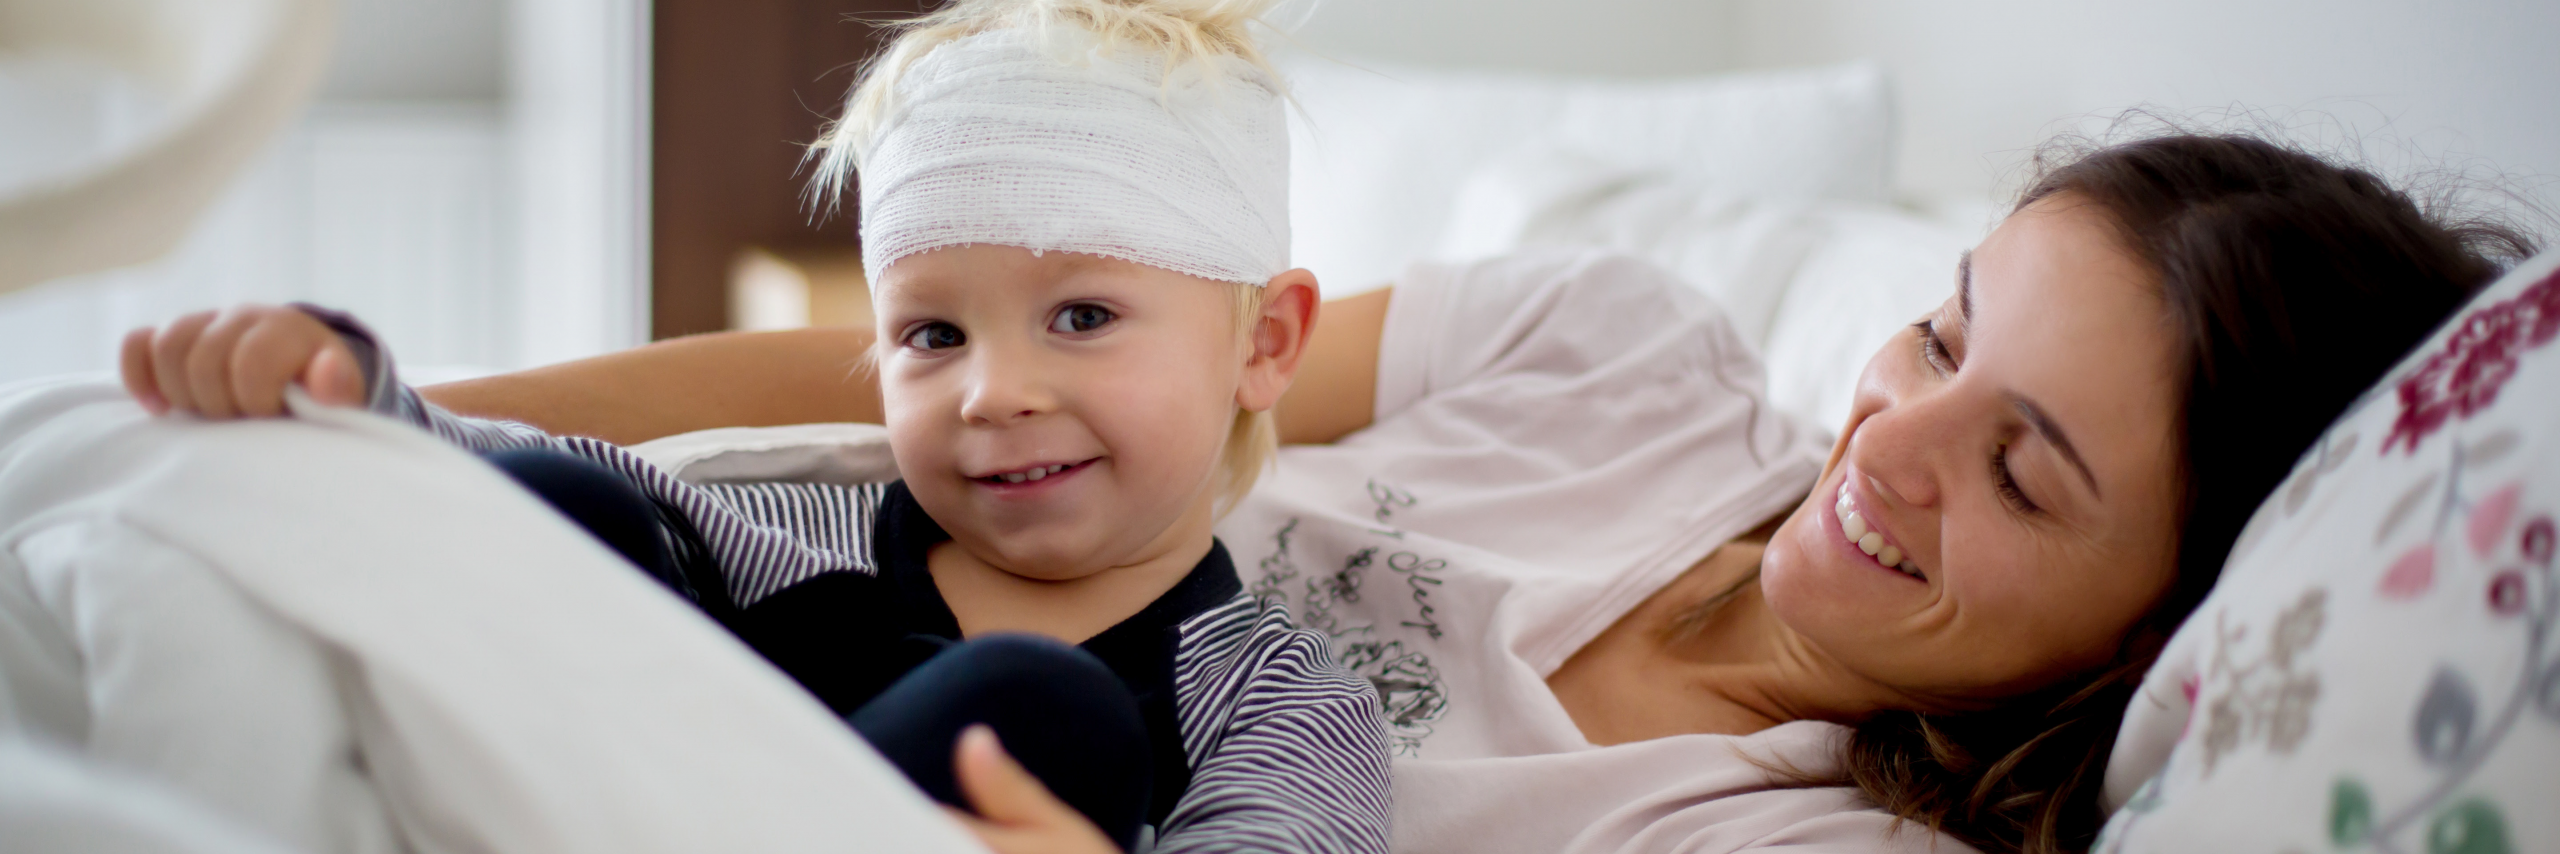 Little boy with a bandage around his head sitting in a bed with his mom laying down. Both are smiling.